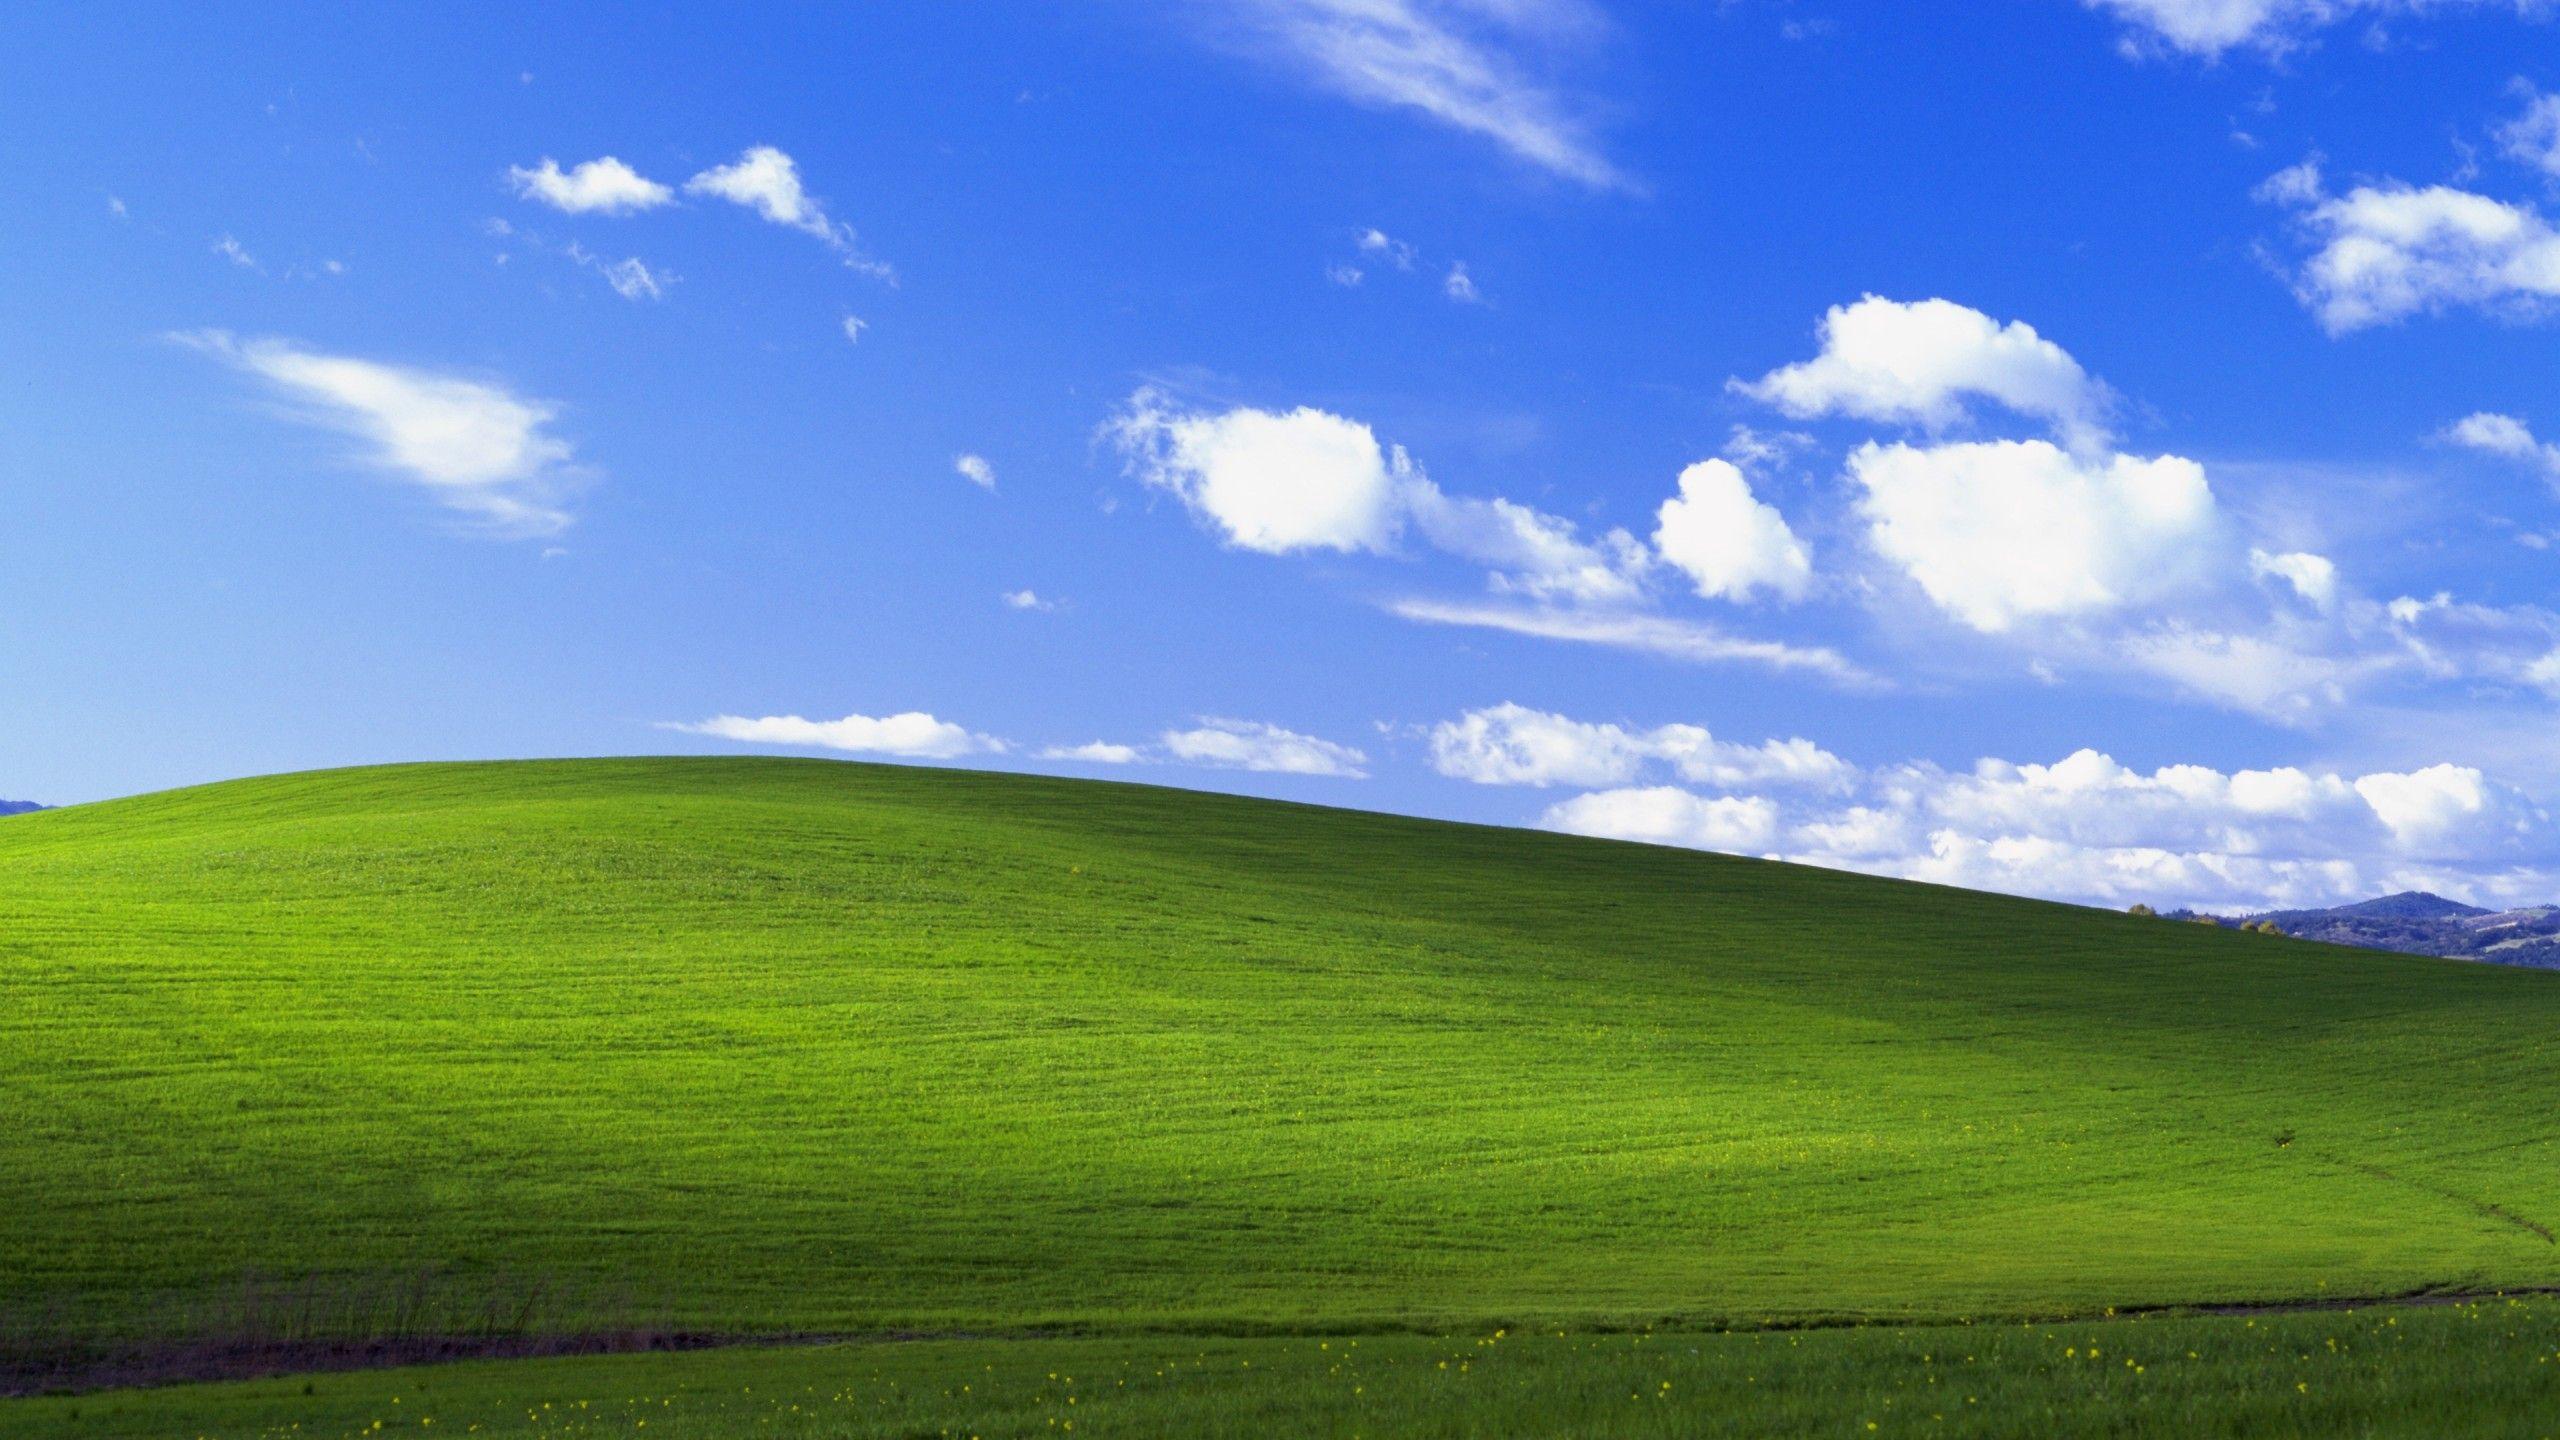 Wallpaper Bliss, Landscape, Windows XP, Stock, 4K, Nature,. Wallpaper for iPhone, Android, Mobile and Desktop